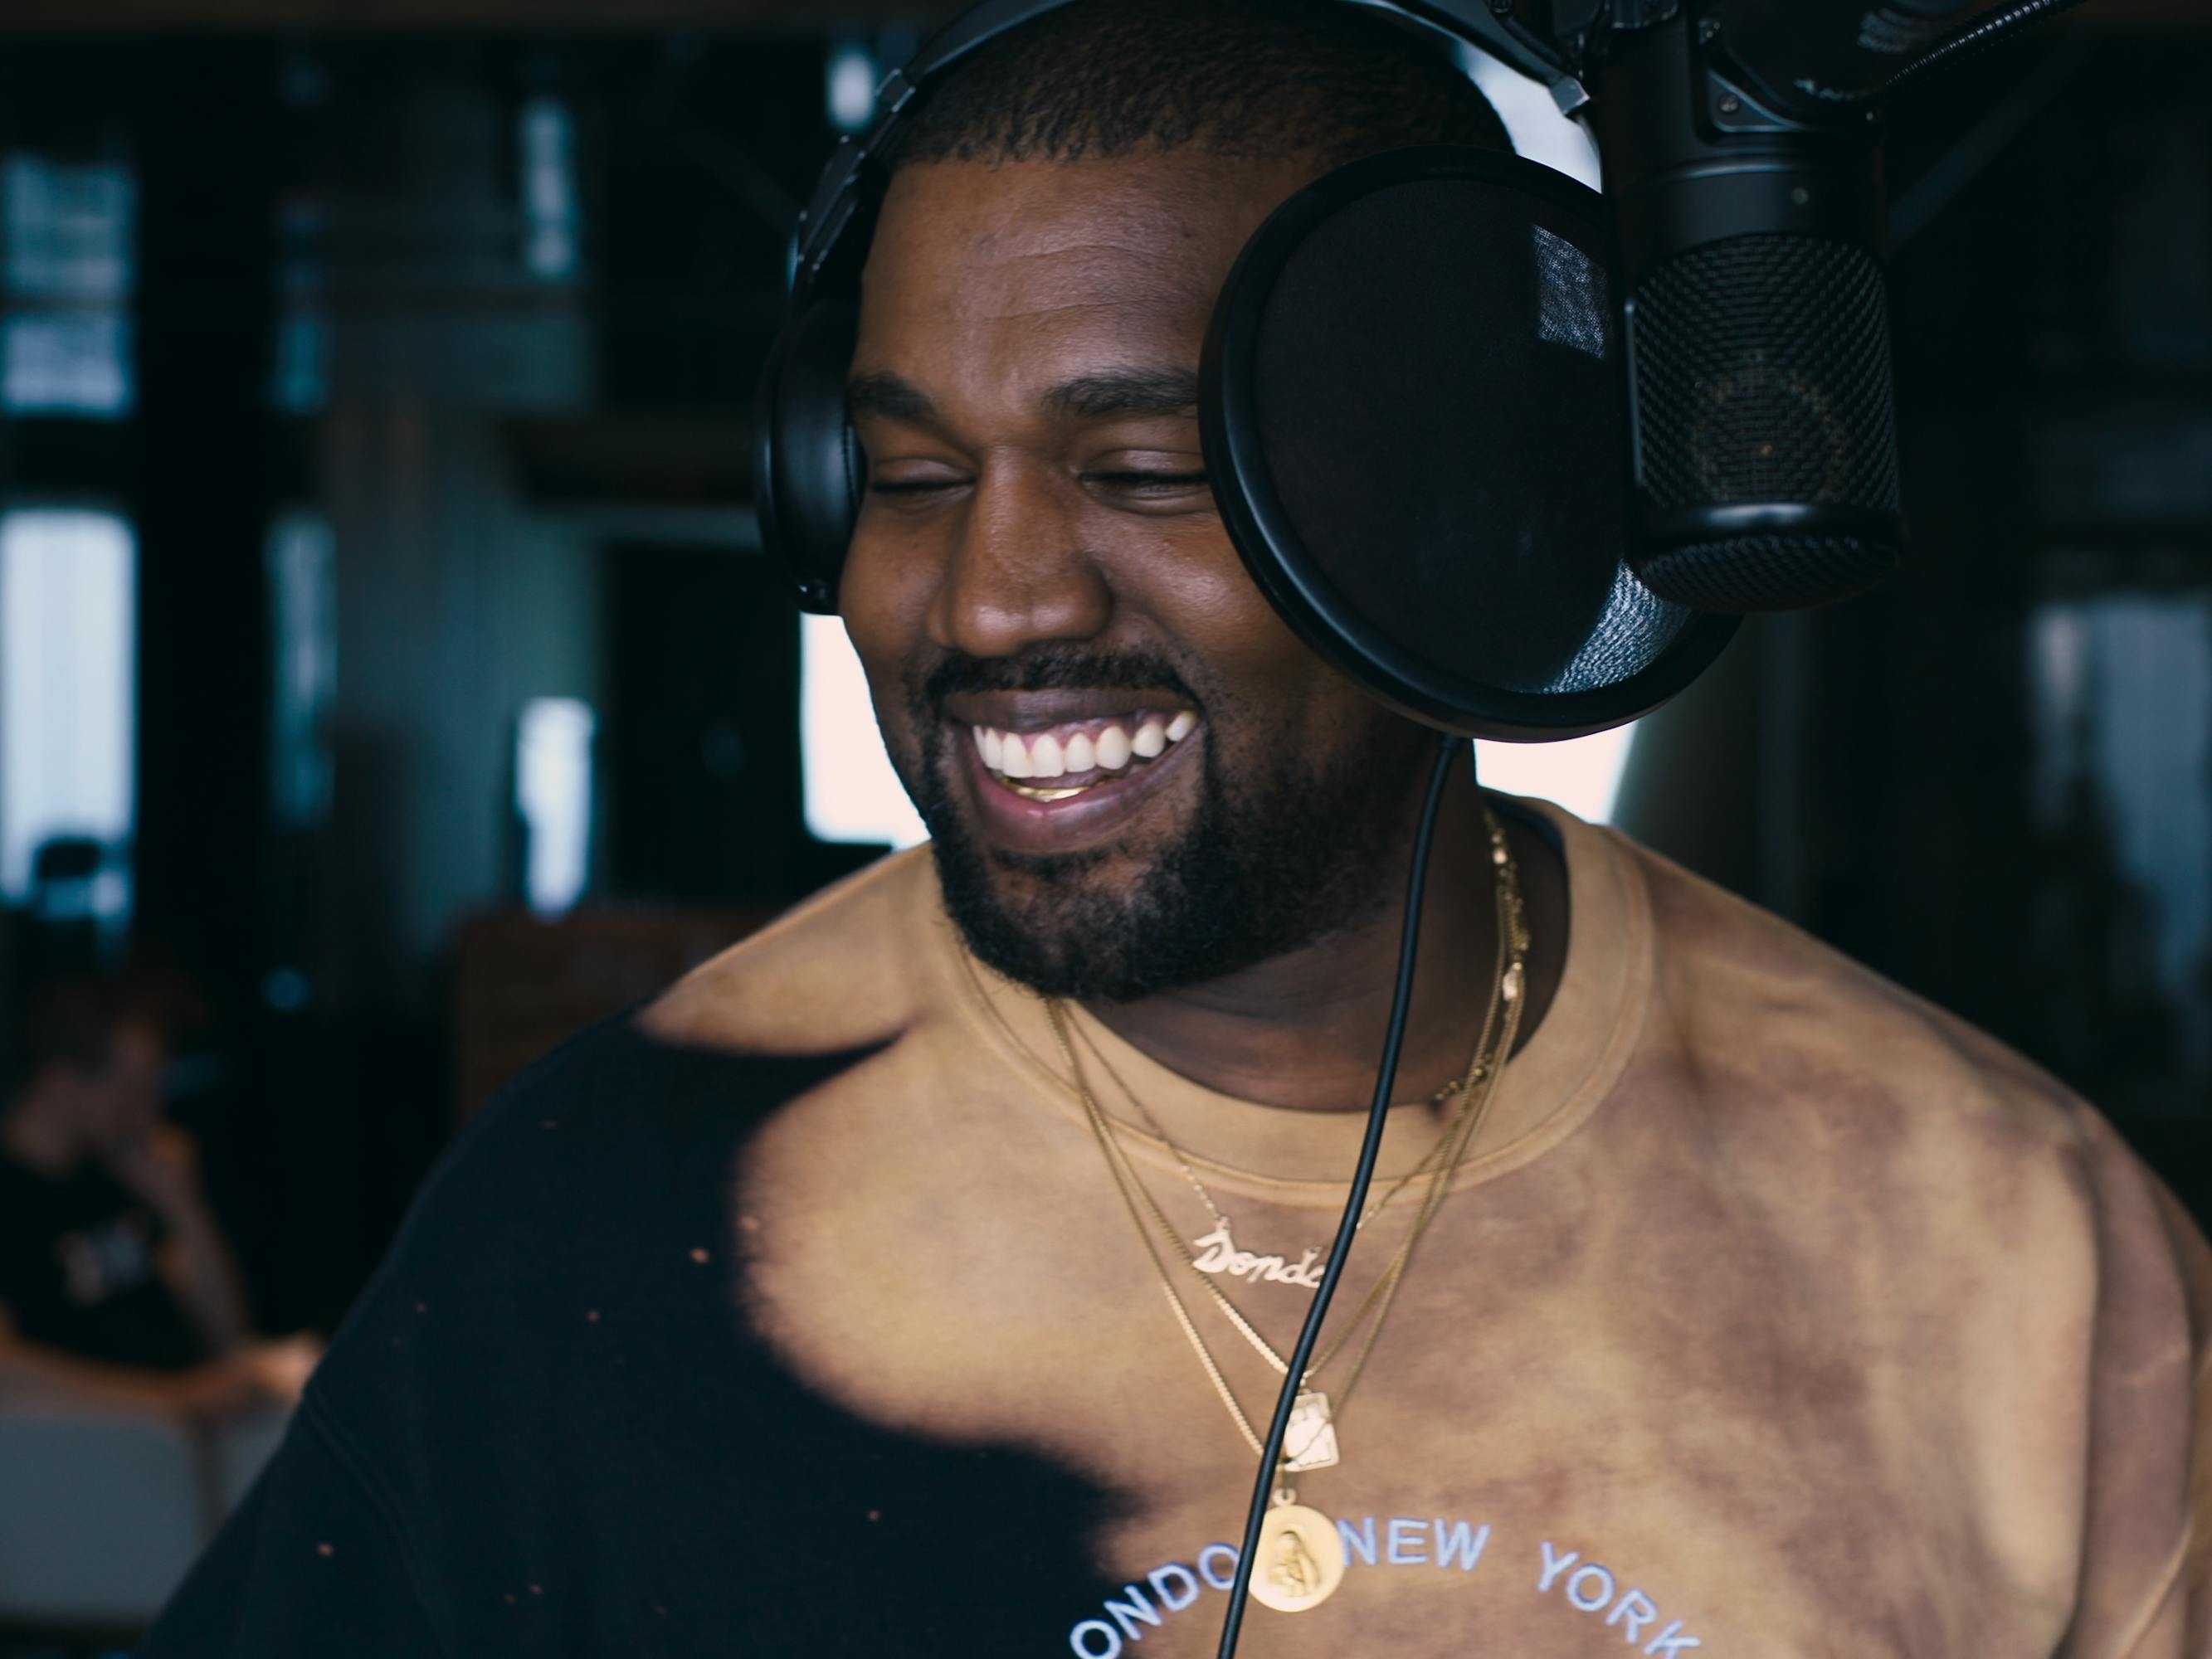 Ye wears a tan shirt and earphones and looks very happy as he recorsd.